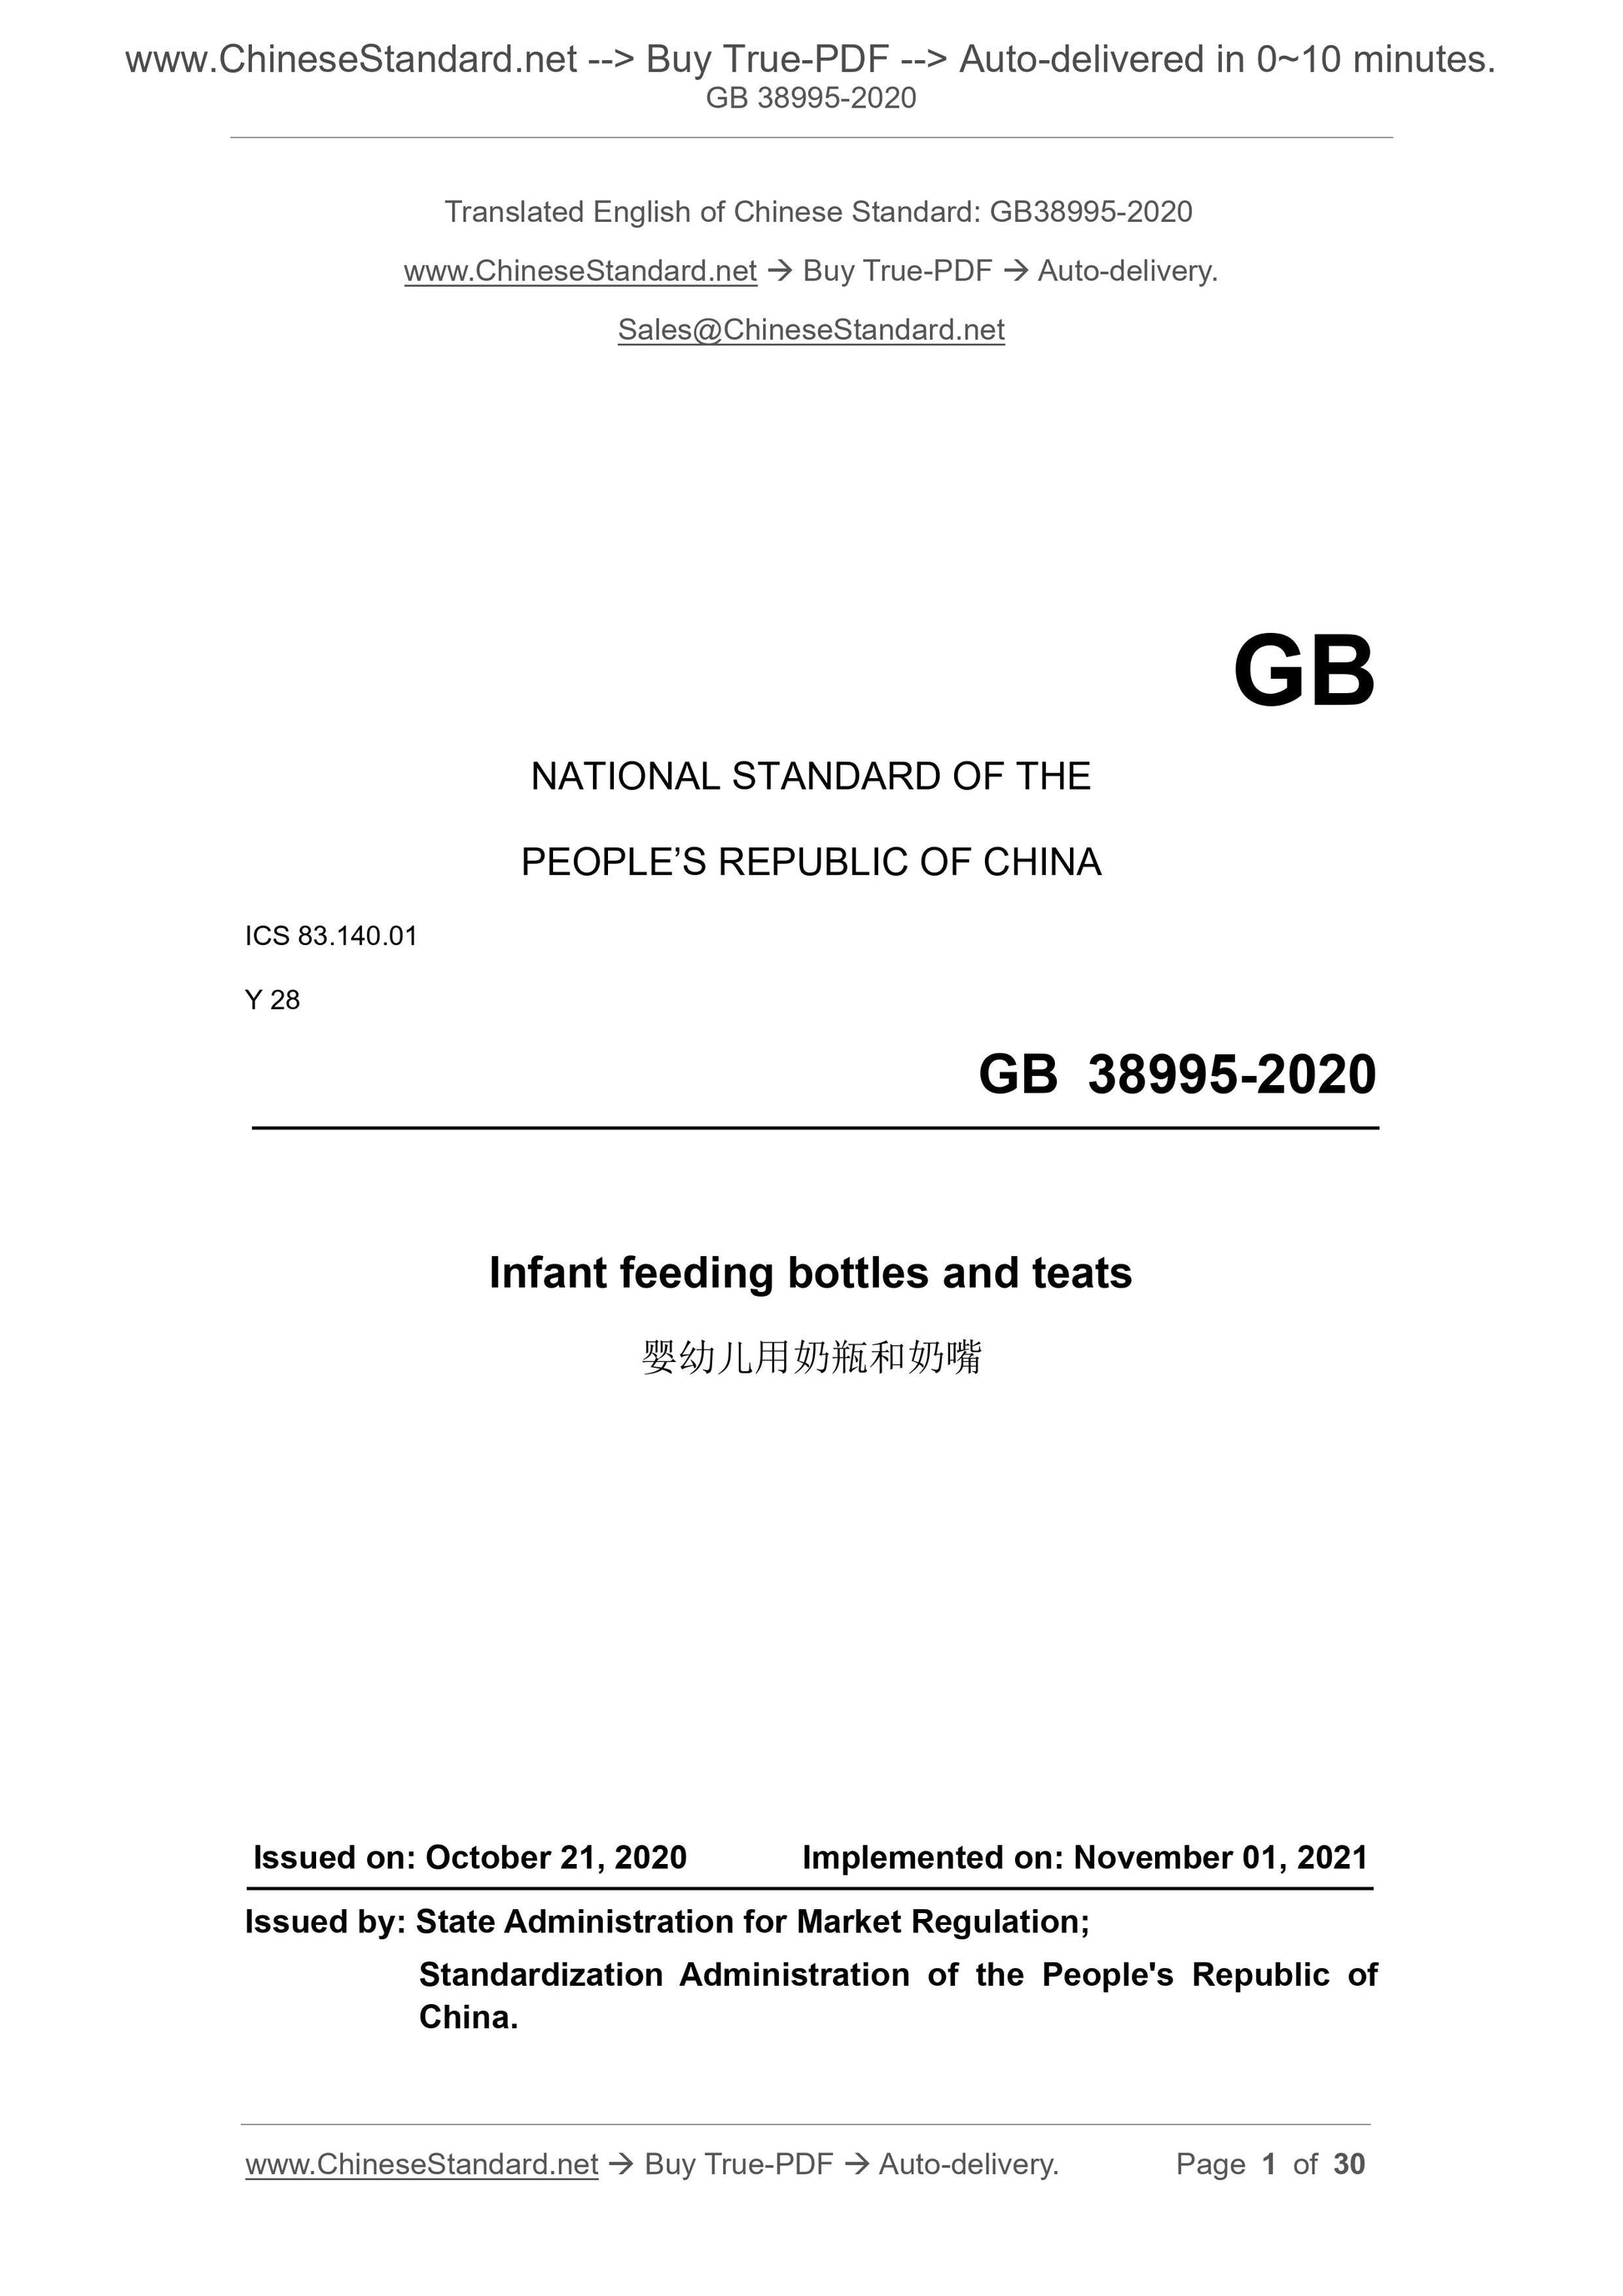 GB 38995-2020 Page 1